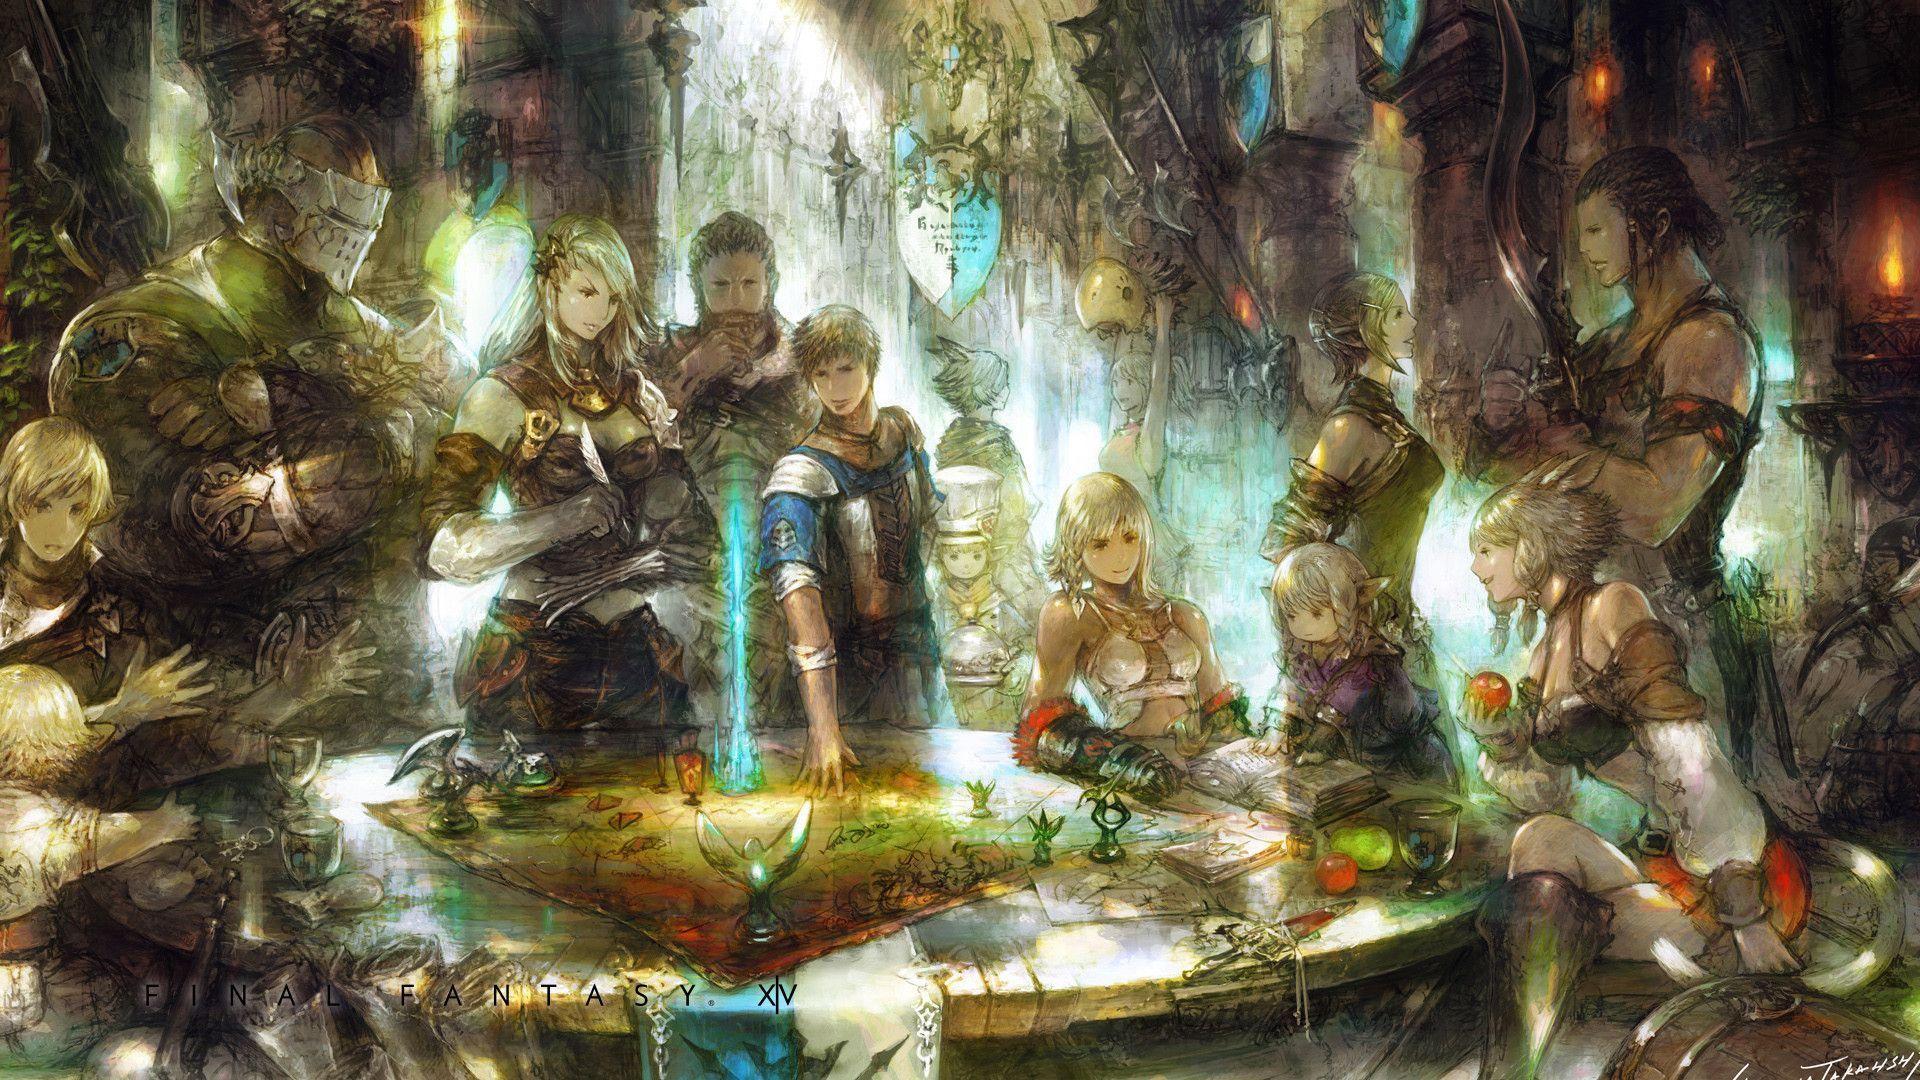 Disciples of the land, Mining, logging in Final Fantasy